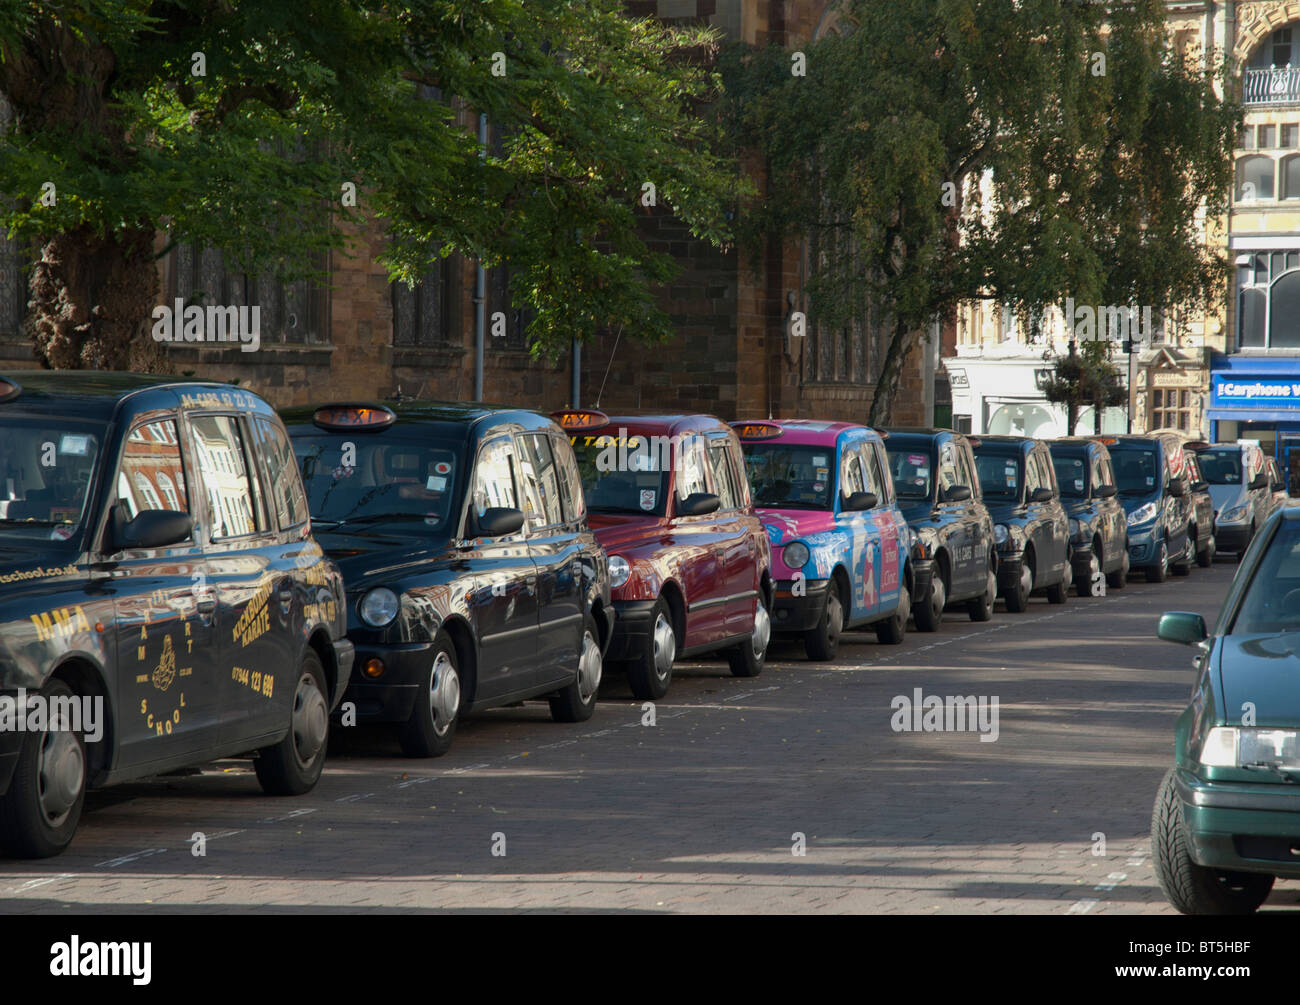 Taxis Lined Up and Waiting Stock Photo